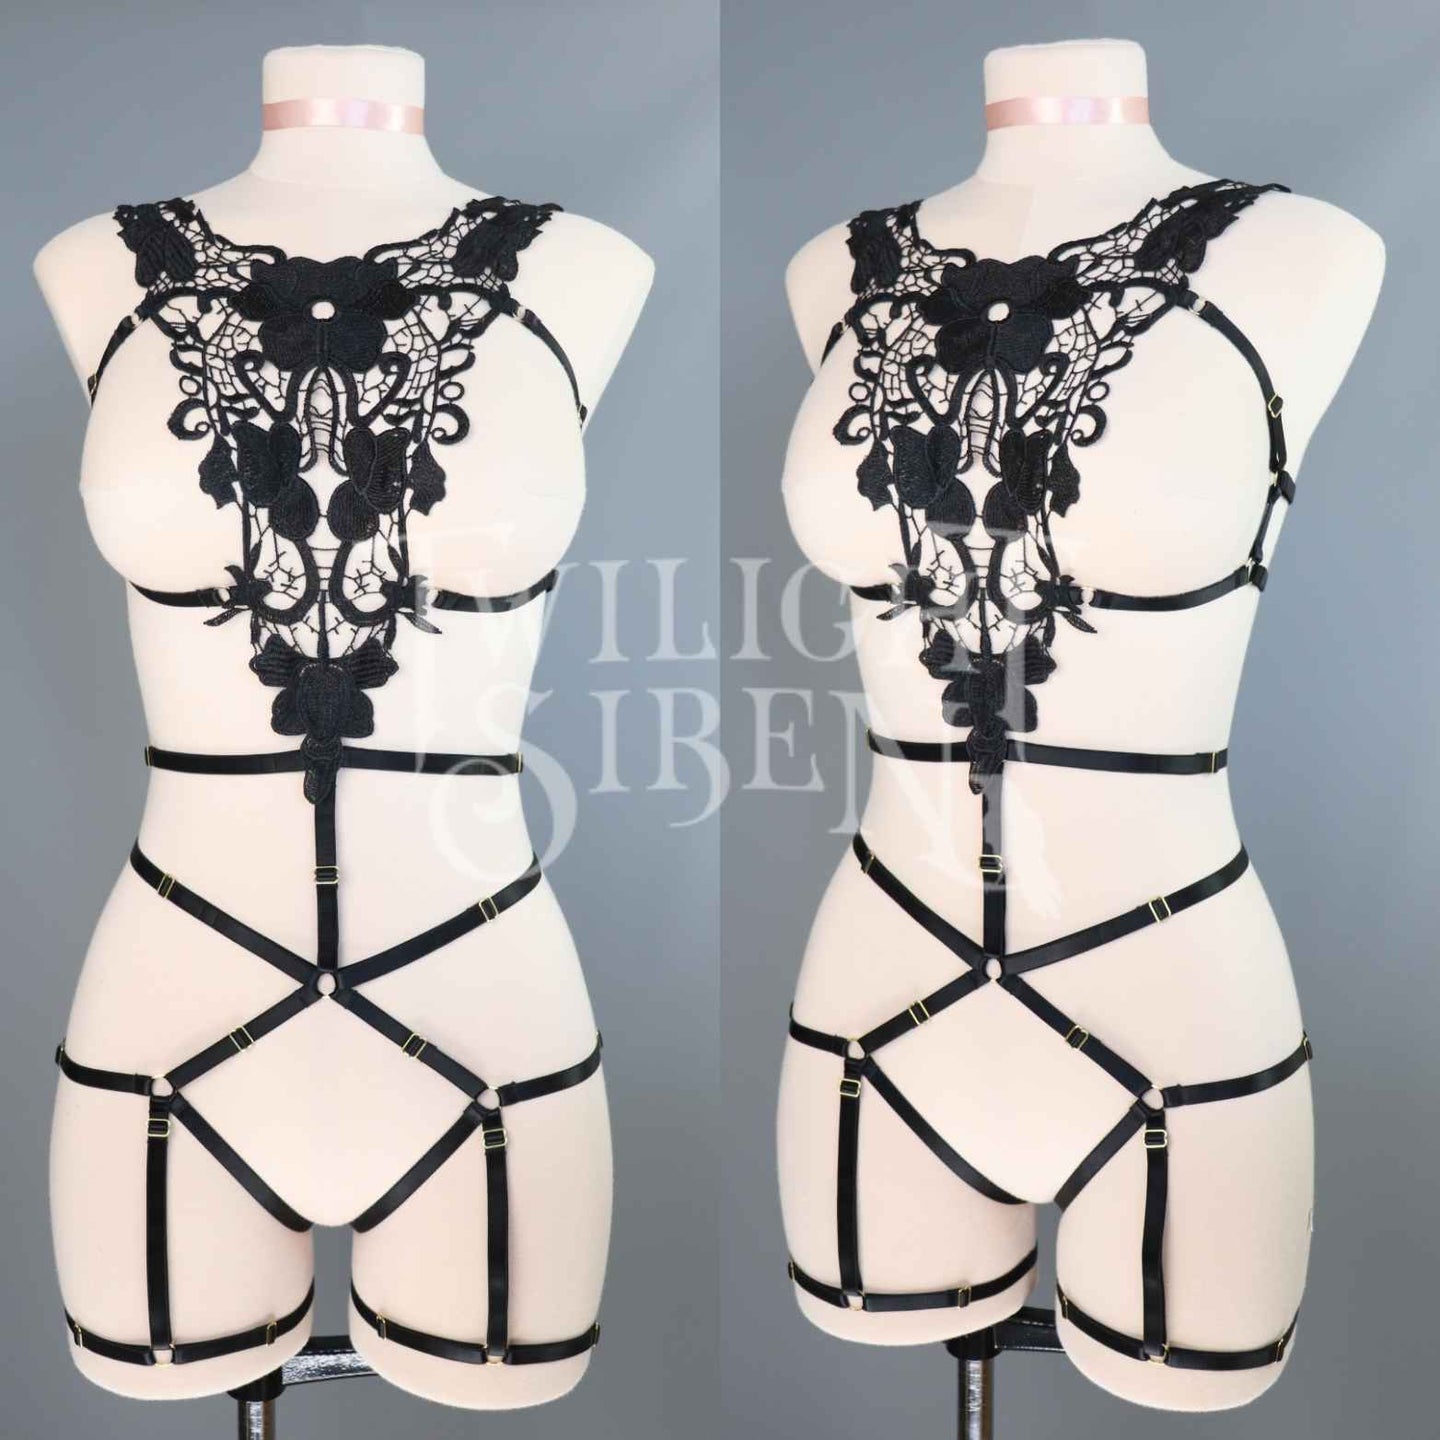 ARIA LACE BODY HARNESS PLAYSUIT